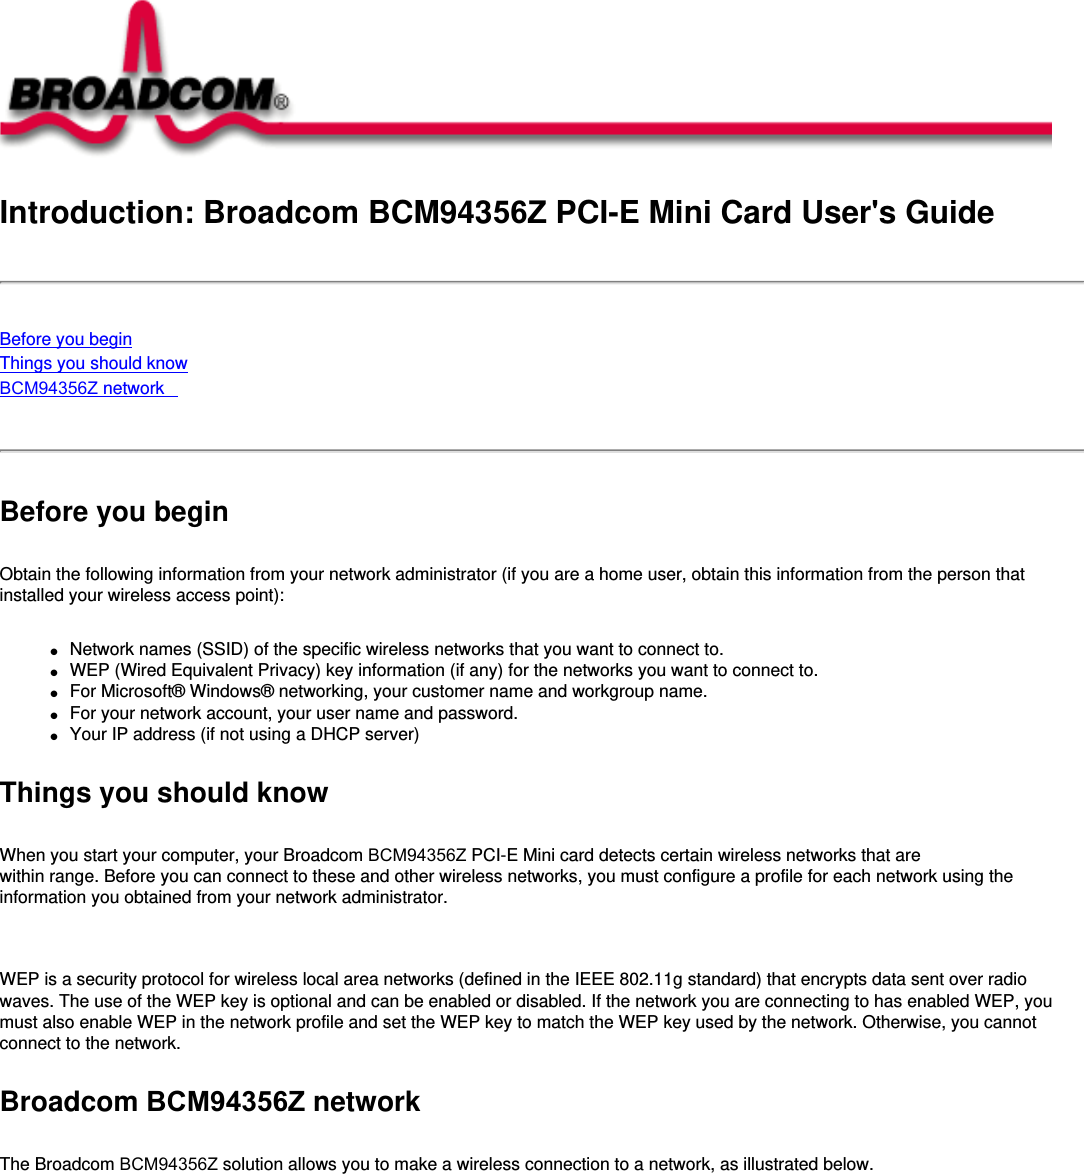 Introduction: Broadcom BCM94356Z PCI-E Mini Card User&apos;s GuideBefore you beginThings you should knowBCM94356Z network Before you beginObtain the following information from your network administrator (if you are a home user, obtain this information from the person that installed your wireless access point):●     Network names (SSID) of the specific wireless networks that you want to connect to.●     WEP (Wired Equivalent Privacy) key information (if any) for the networks you want to connect to.●     For Microsoft® Windows® networking, your customer name and workgroup name.●     For your network account, your user name and password.●     Your IP address (if not using a DHCP server)Things you should knowWhen you start your computer, your Broadcom BCM94356Z PCI-E Mini card detects certain wireless networks that are within range. Before you can connect to these and other wireless networks, you must configure a profile for each network using the information you obtained from your network administrator.   WEP is a security protocol for wireless local area networks (defined in the IEEE 802.11g standard) that encrypts data sent over radio waves. The use of the WEP key is optional and can be enabled or disabled. If the network you are connecting to has enabled WEP, you must also enable WEP in the network profile and set the WEP key to match the WEP key used by the network. Otherwise, you cannot connect to the network.Broadcom BCM94356Z networkThe Broadcom BCM94356Z solution allows you to make a wireless connection to a network, as illustrated below.